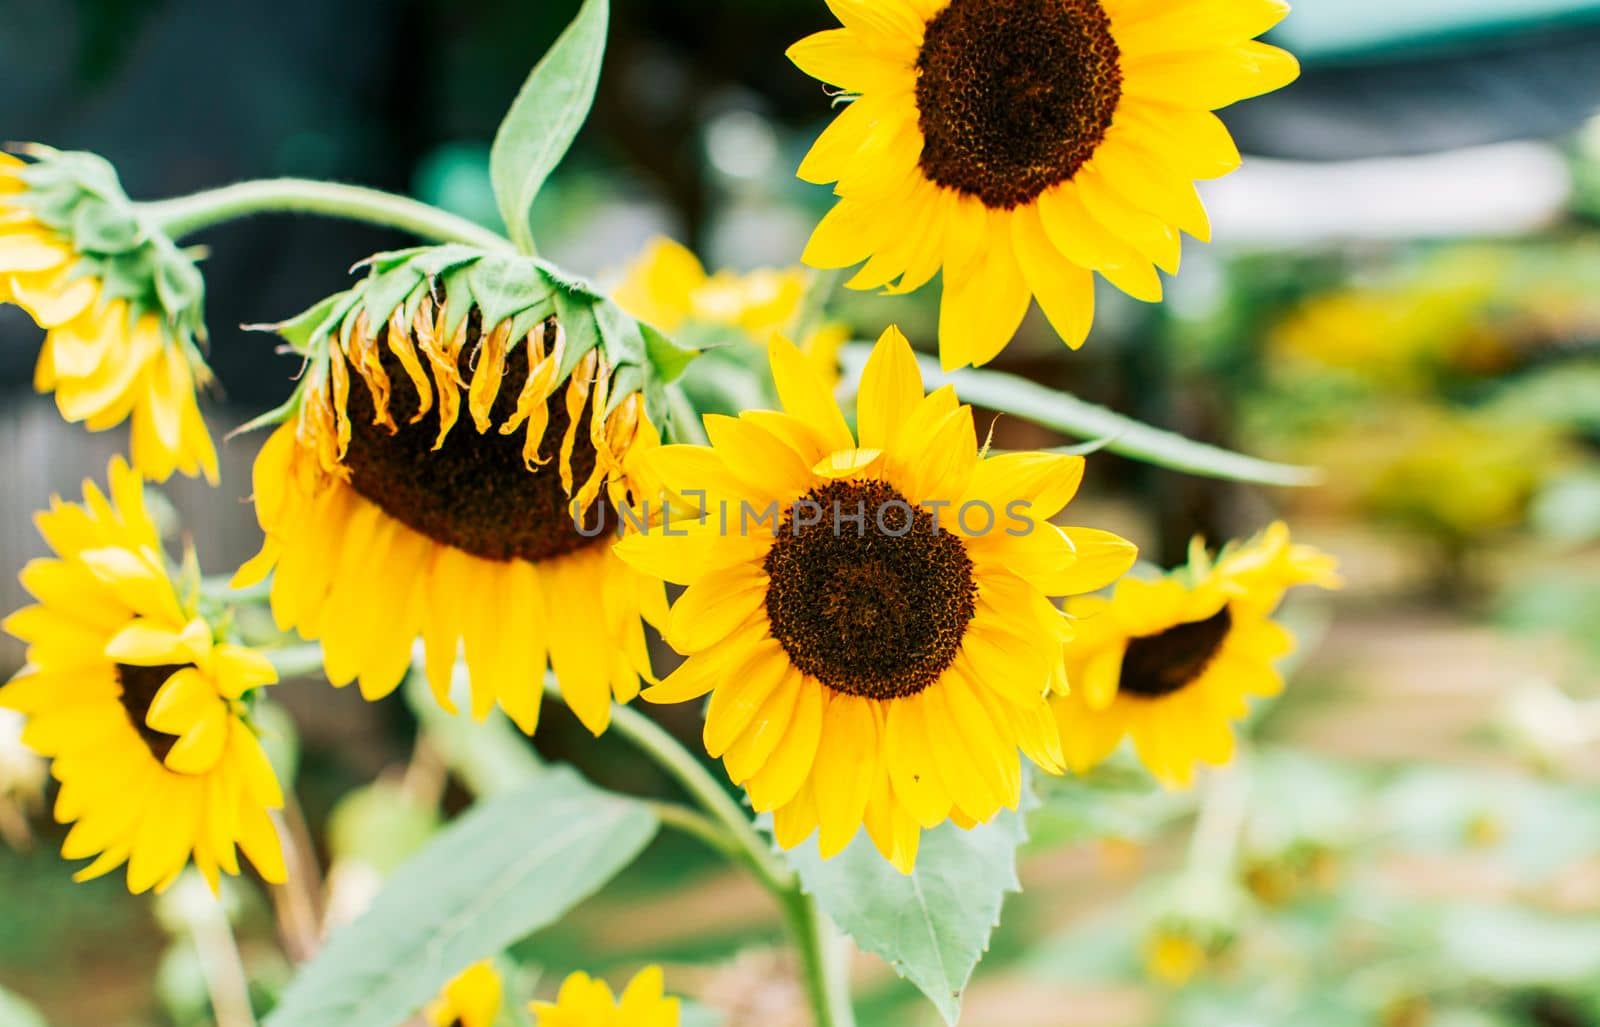 Beautiful sunflowers in a natural garden on a sunny day. Details of sunflowers and petals. Five yellow sunflowers in a garden, Close up of five beautiful sunflowers in a garden at sunset